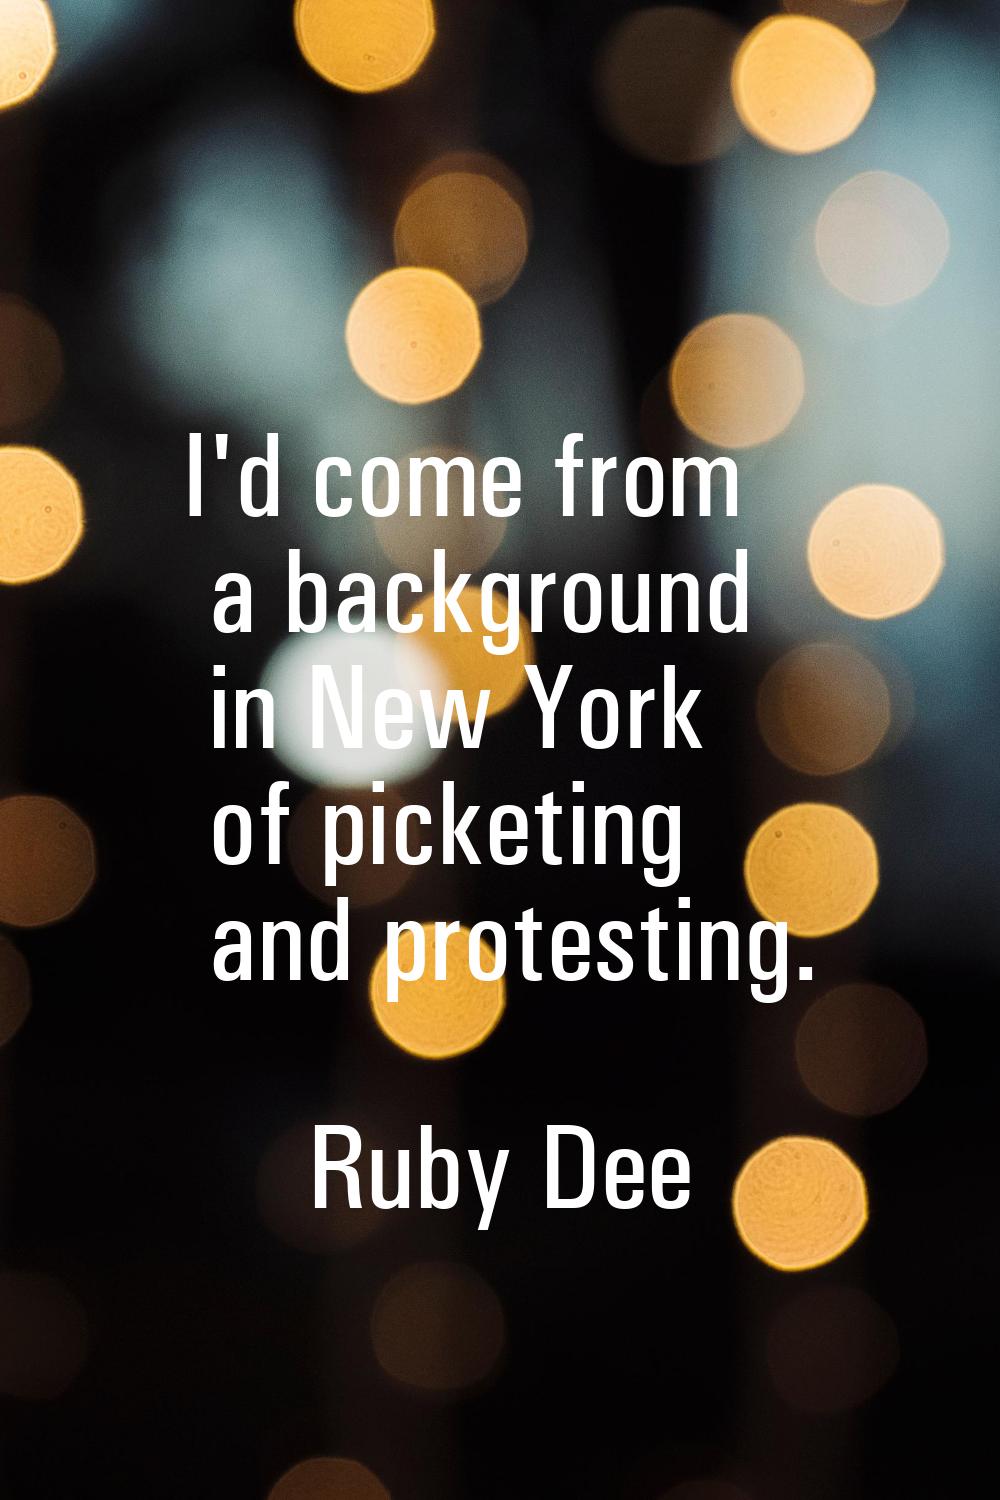 I'd come from a background in New York of picketing and protesting.